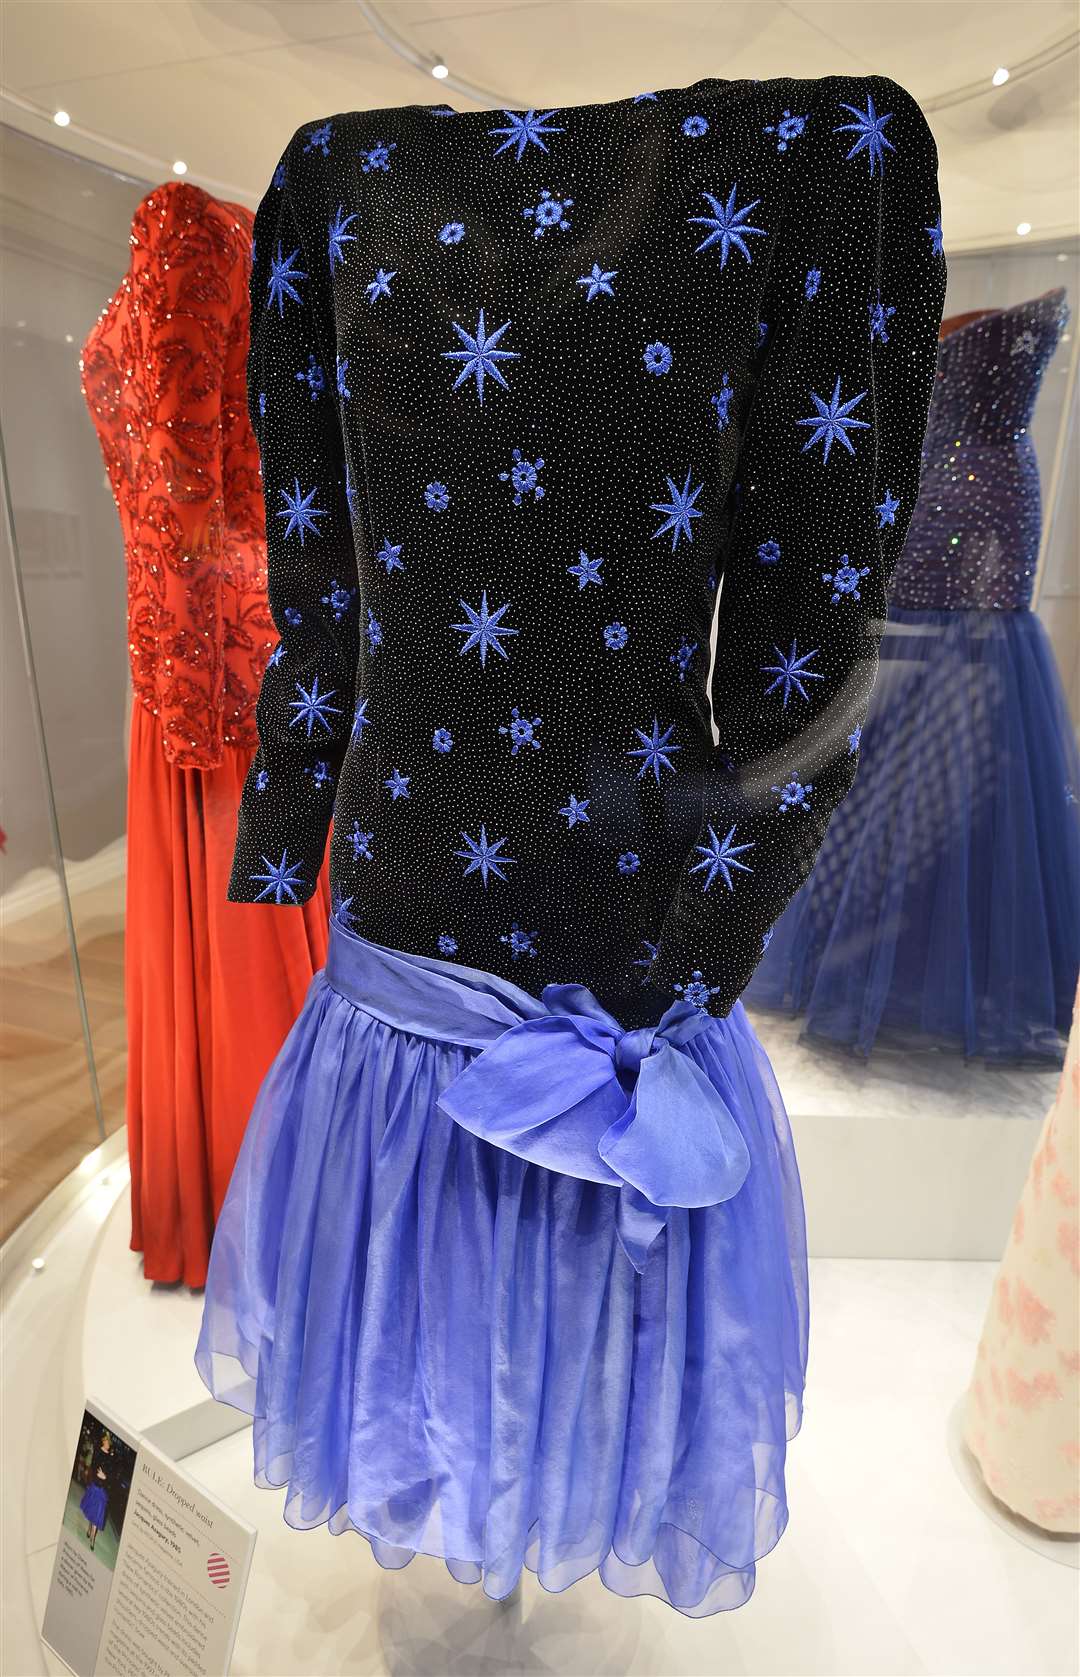 A dress worn by Princess Diana at a dinner in Florence in 1985 (John Stillwell /PA)